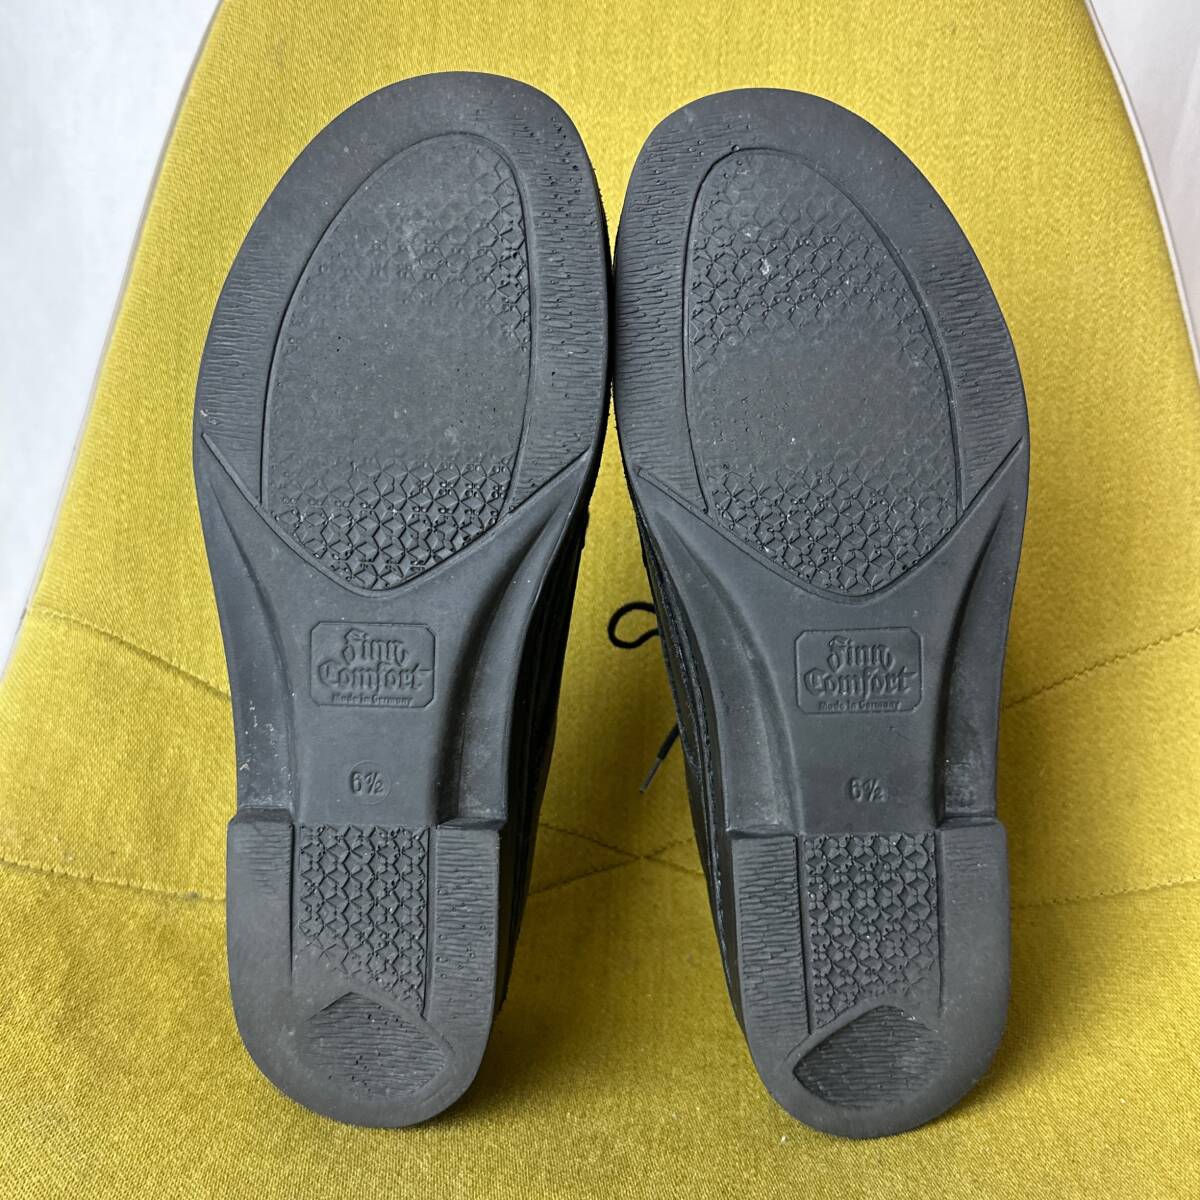 Finn comfort fins comfort walking shoes 6.5 Germany made 25.0 corresponding leather shoes sneakers 